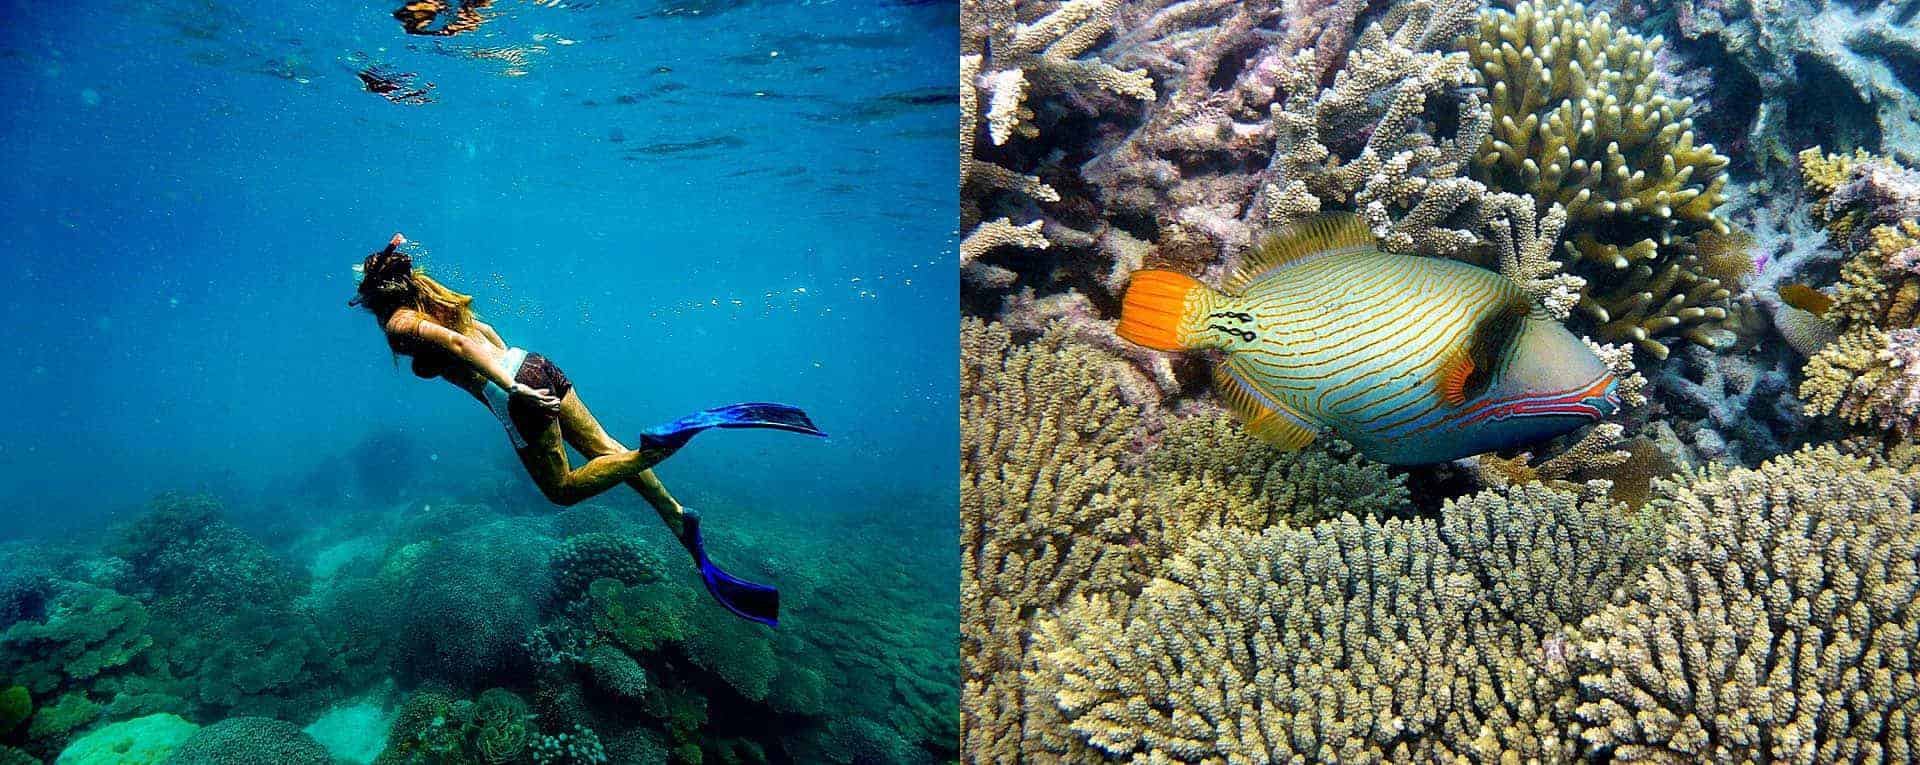 Snorkeling Guide For Marine Parks In Tanzania - AfricanMecca Safaris